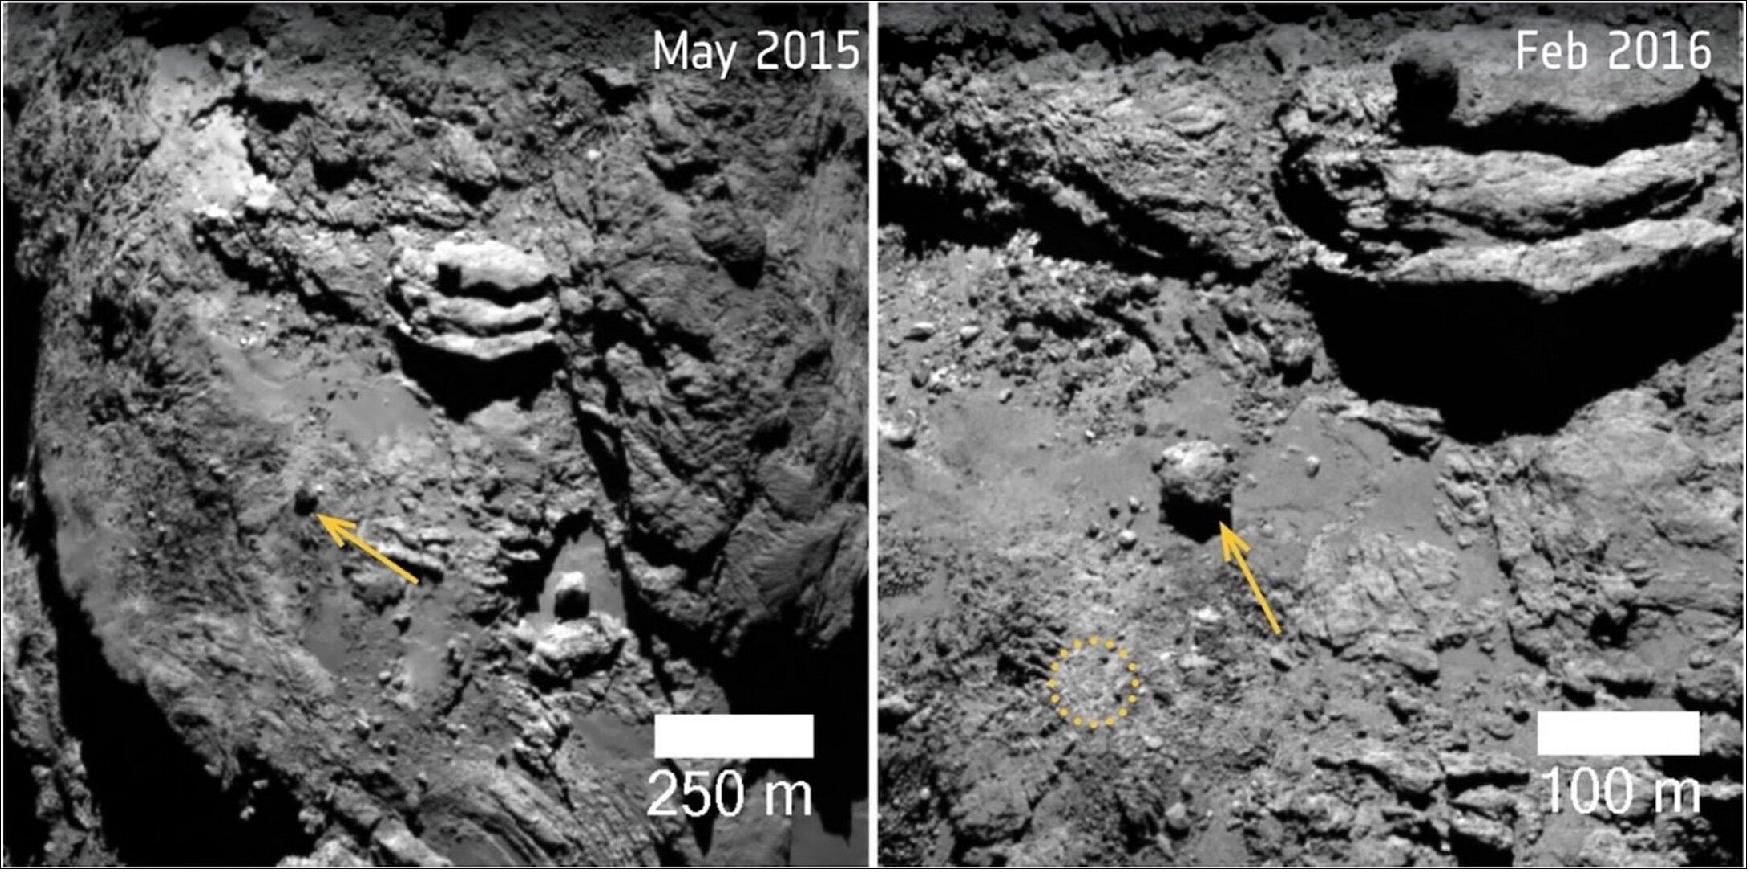 Figure 33: Rosetta Zoo comparison image. Thanks to the visual inspection of many volunteers, the project will produce maps of changes and active areas on the comet's surface, with labels for each type of change. Scientists will then be able to associate the activity of the comet with modifications on its surface, developing new models to link the physics of comet activity to observed changes such as lifted boulders or collapsed cliffs (image credit: ESA/Zooniverse)